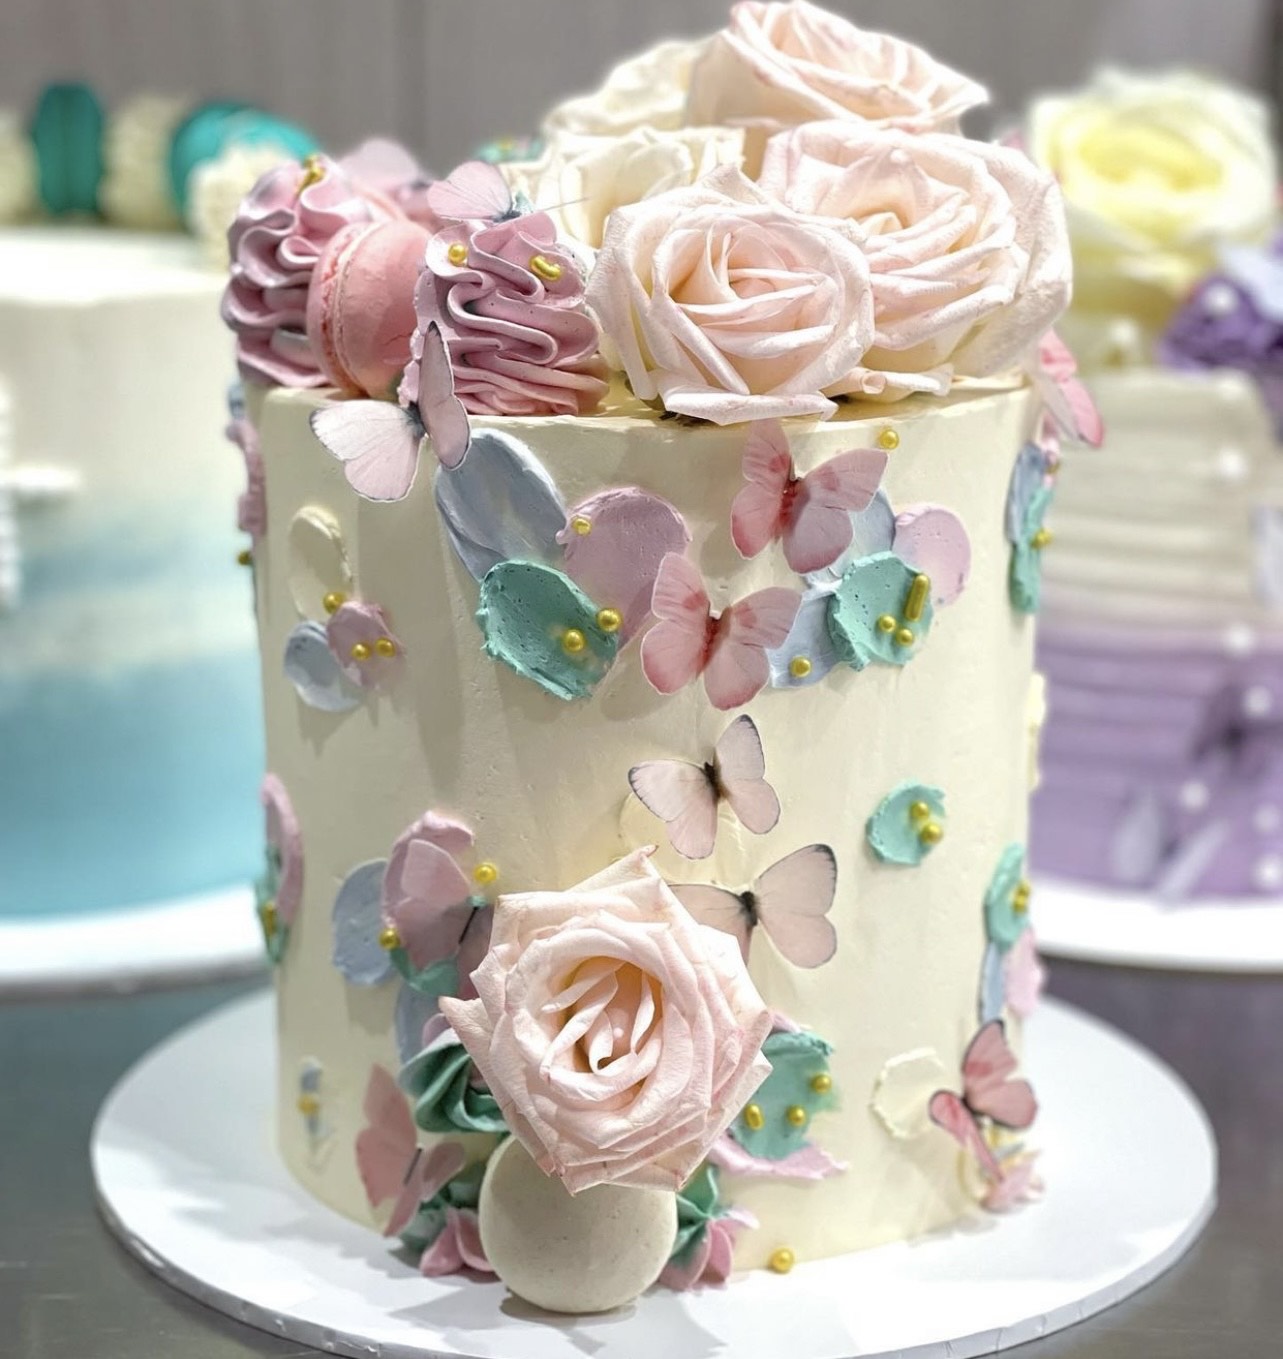 32 Pastel Wedding Cakes You Have to See